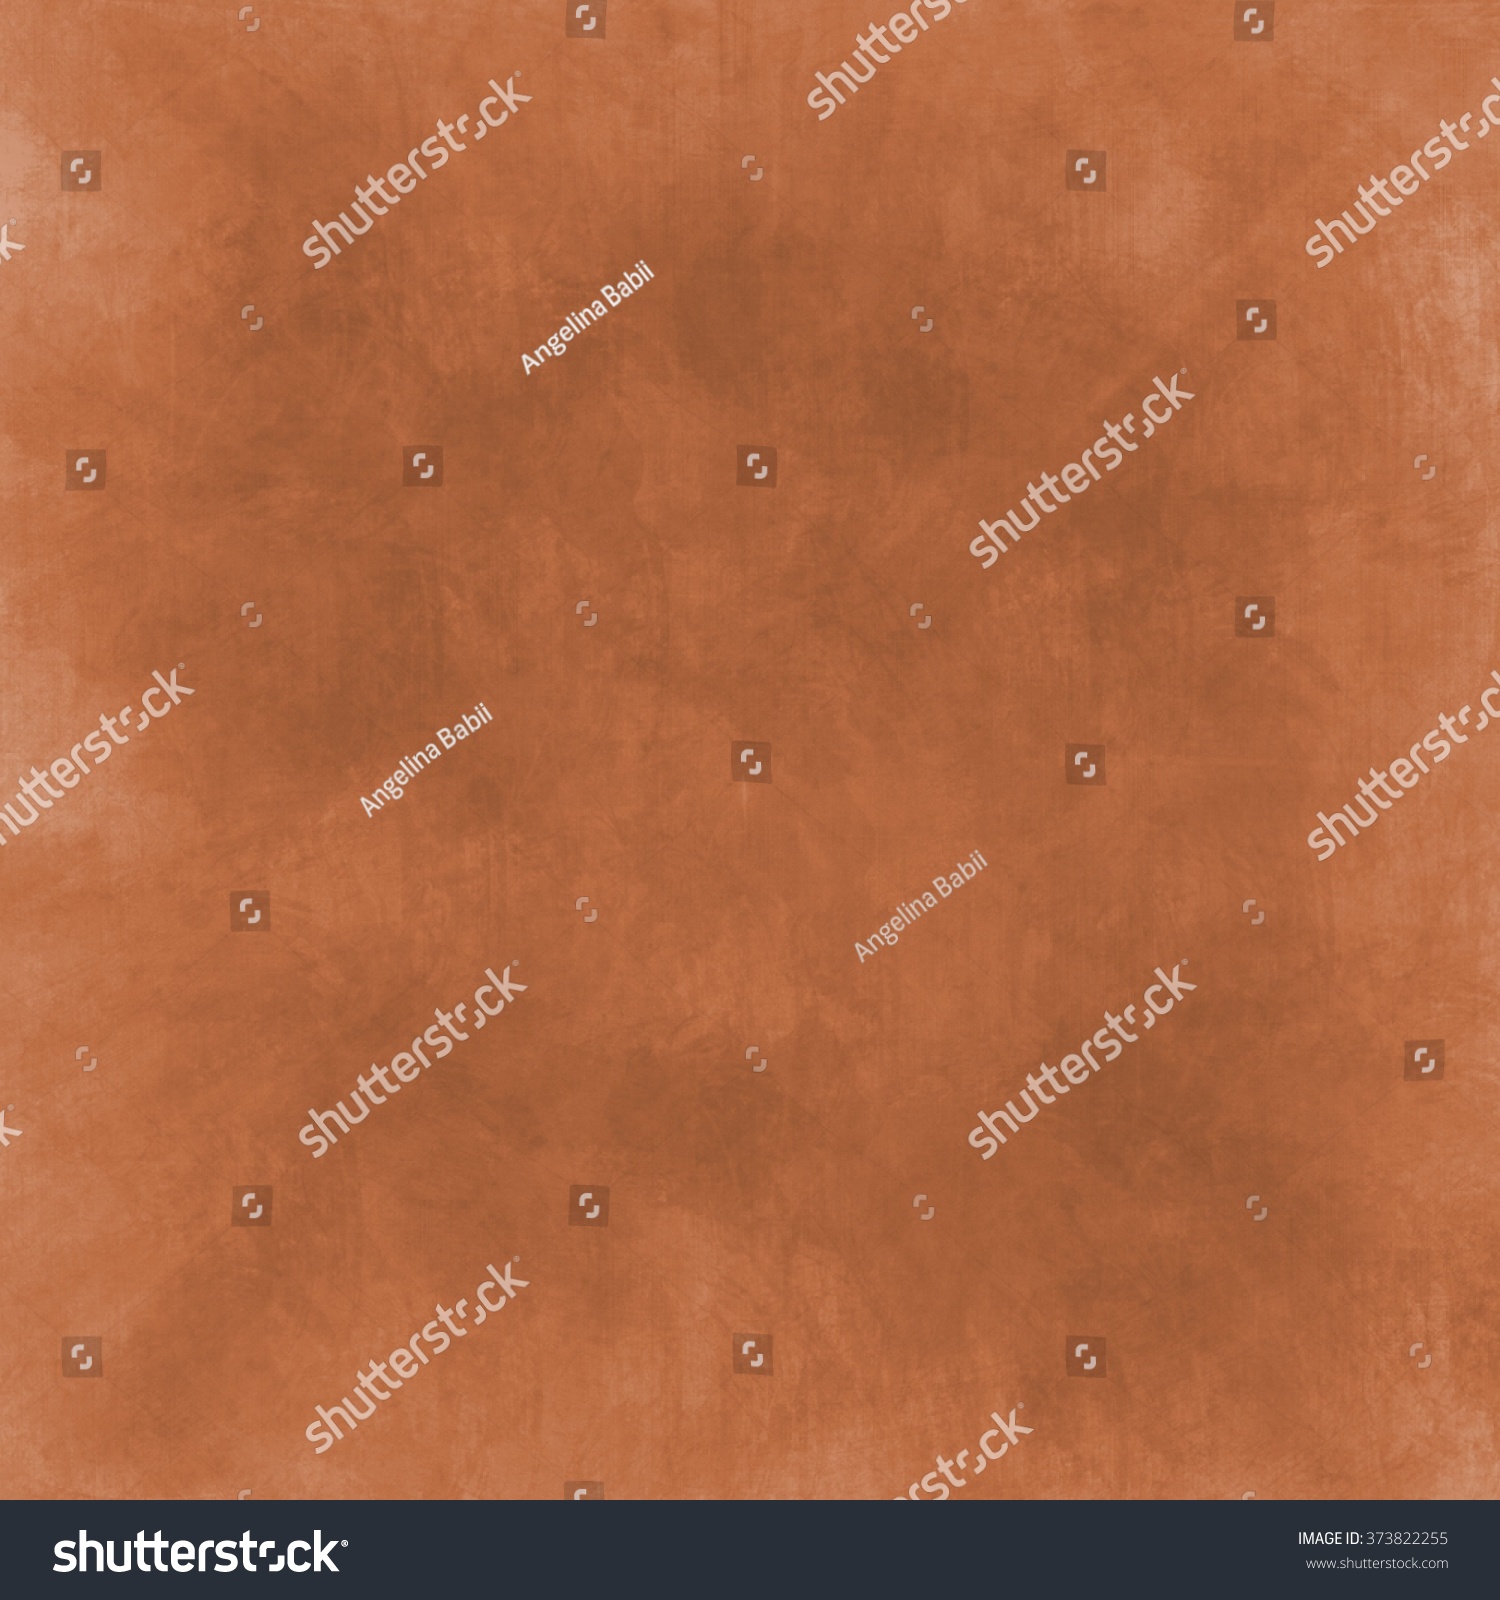 Brown paper texture, Light background #373822255